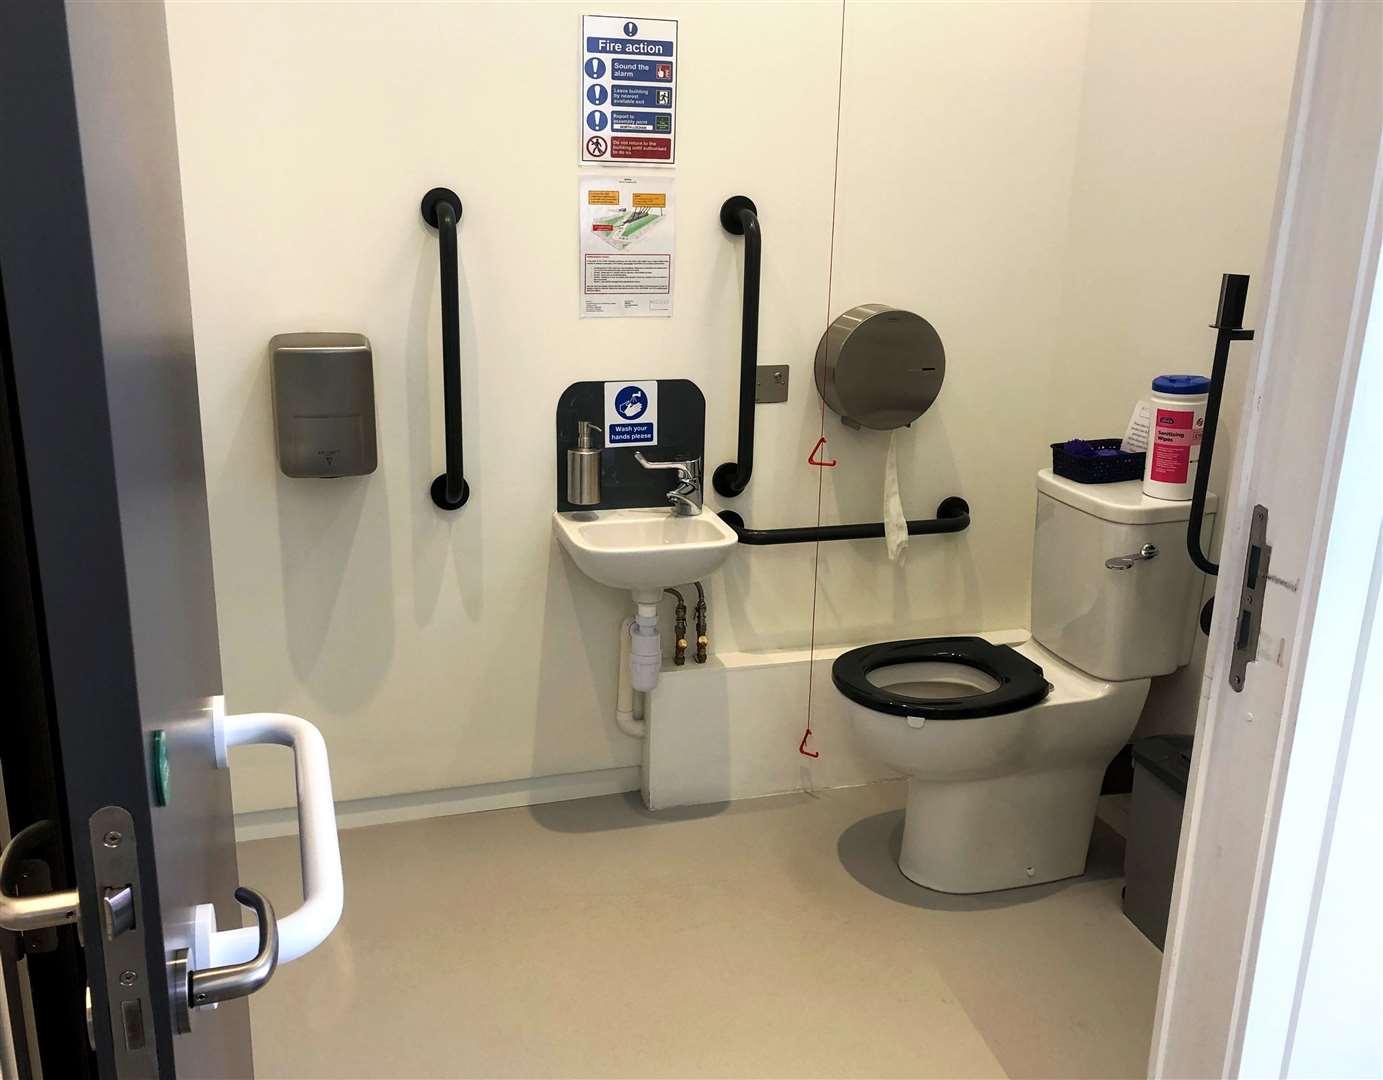 The Nucleus archive toilet fitted all the five criteria to make it one of the best according to Louise Smith's survey.